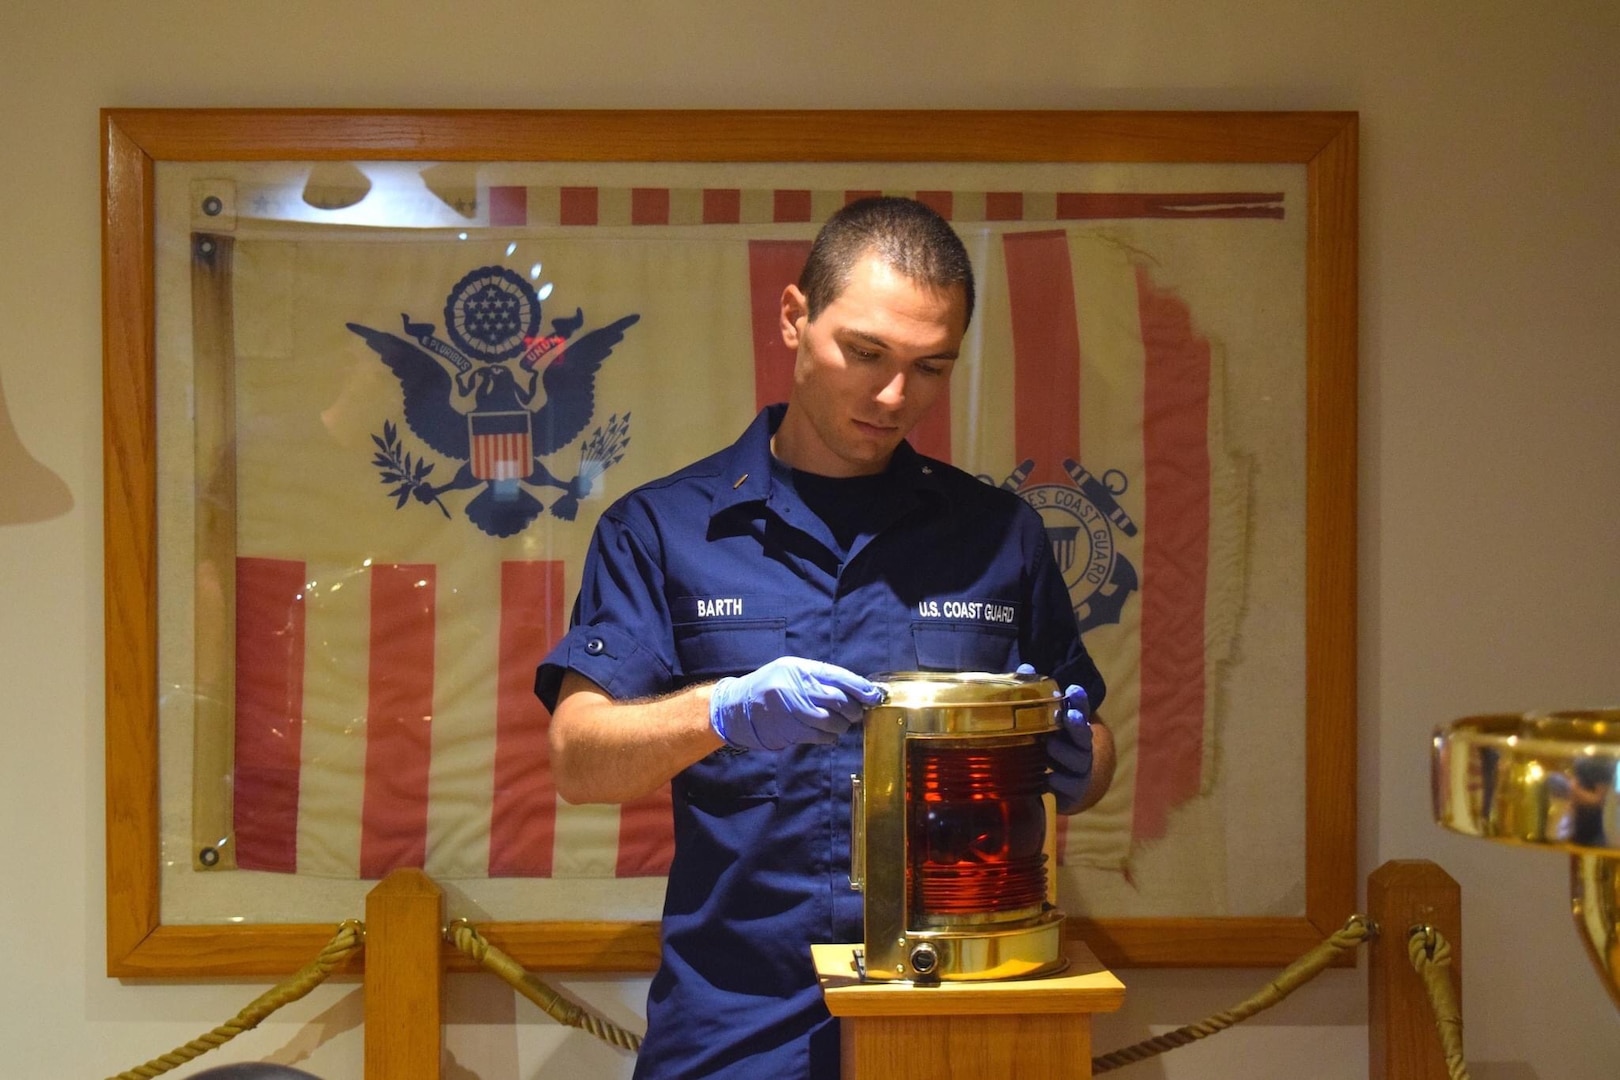 Ensign Michael Barth shines brass on the Coast Guard Cutter Cuyahoga Memorial while serving as an officer candidate in June 2022. The Cuyahoga was an officer candidate training vessel that sunk after a collision in which 11 officer candidates were lost. (Coast Guard Photo, Leadership Development Center)